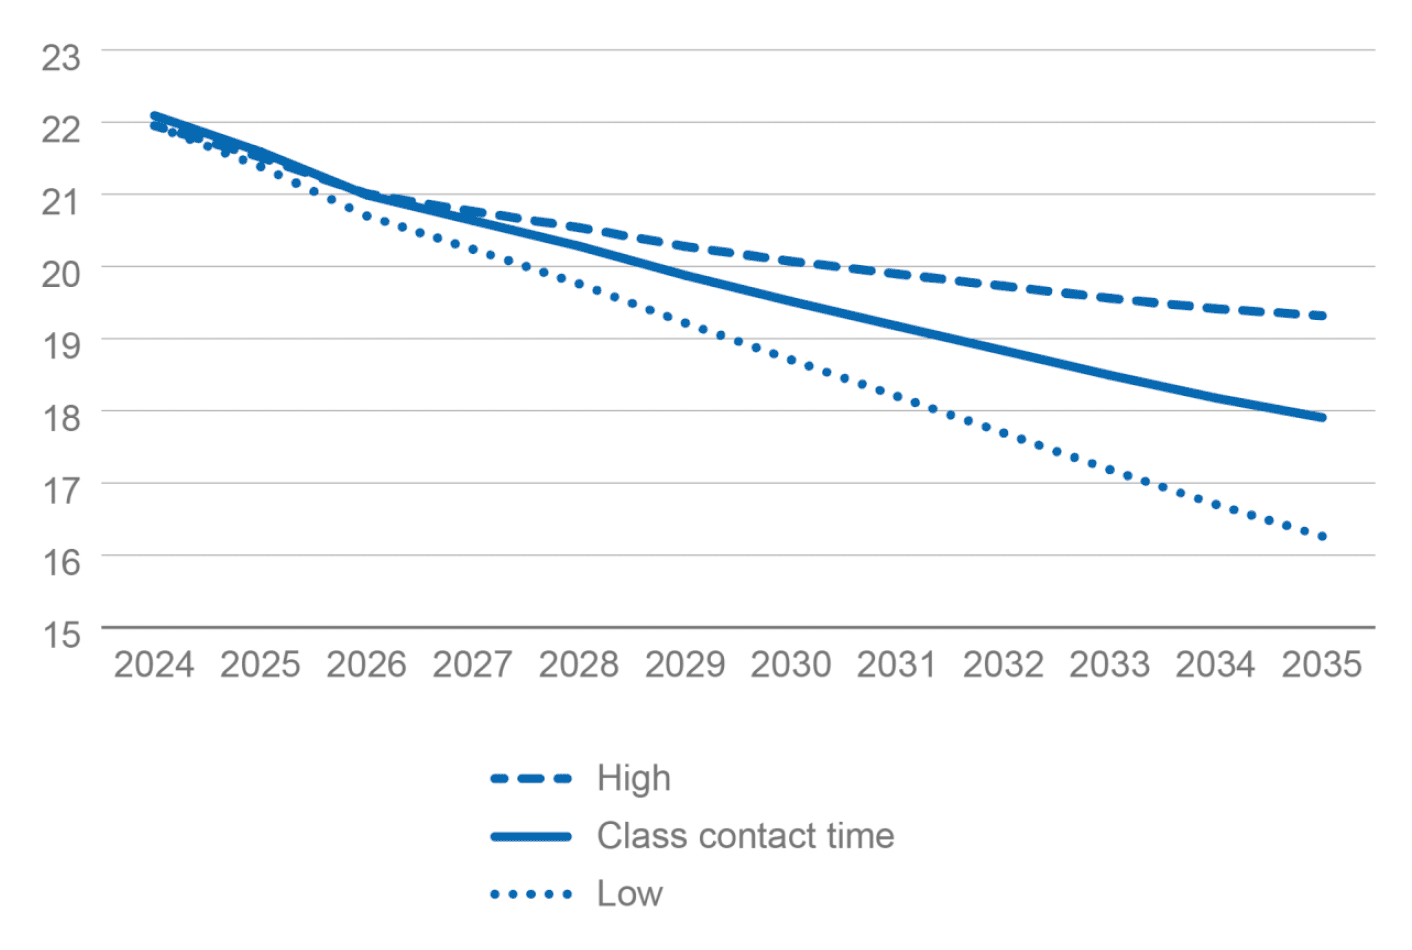 Line chart showing how the class contact time can steadily fall in high, low and central scenarios, when the current policy commitment is followed.